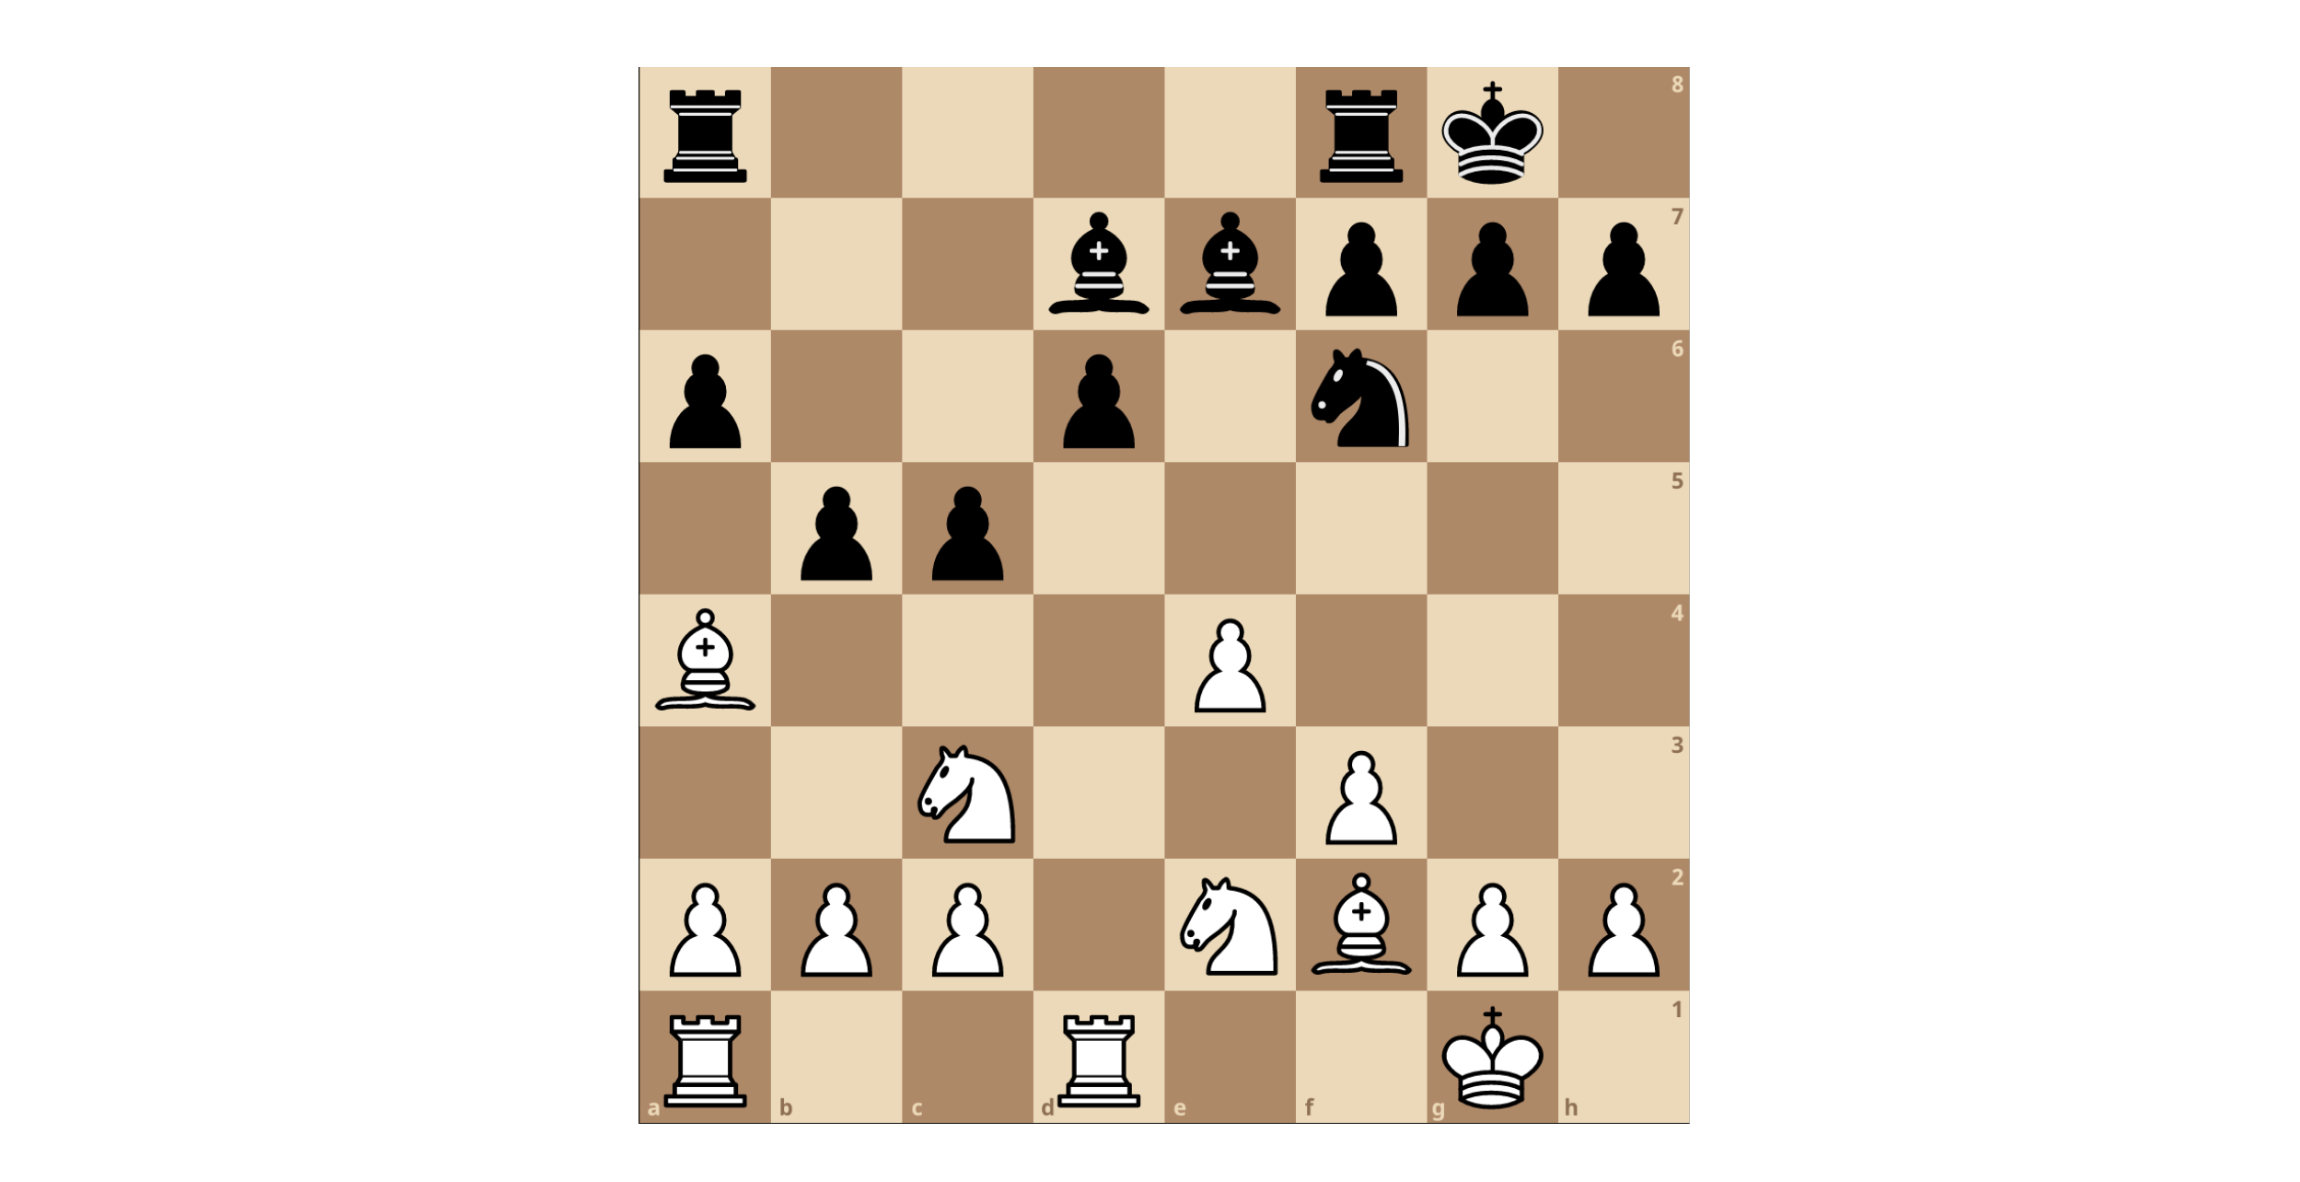 Figure 1. White to move. Here, white’s bishop on a4 is doomed, attacked by black’s pawn on b5. White could delay the inevitable by moving his bishop to b3, but then black simply seals the bishop’s fate with pawn to c4. In that position, white does not have time to save his bishop, and it will be captured no matter what on the next move by the pawn on c4. Due to the Horizon Effect, at a limited depth white will not recognize this and will play hopeless moves like pawn from e4 to e5, temporarily attacking the knight but easily parried by capturing with the pawn on d6. This phenomenon is deemed the “Horizon Effect” because by pushing negative outcomes beyond the “horizon” of calculation depth, the engine is able to trick itself into believing that the problem doesn’t exist. A true case of “see no evil”.